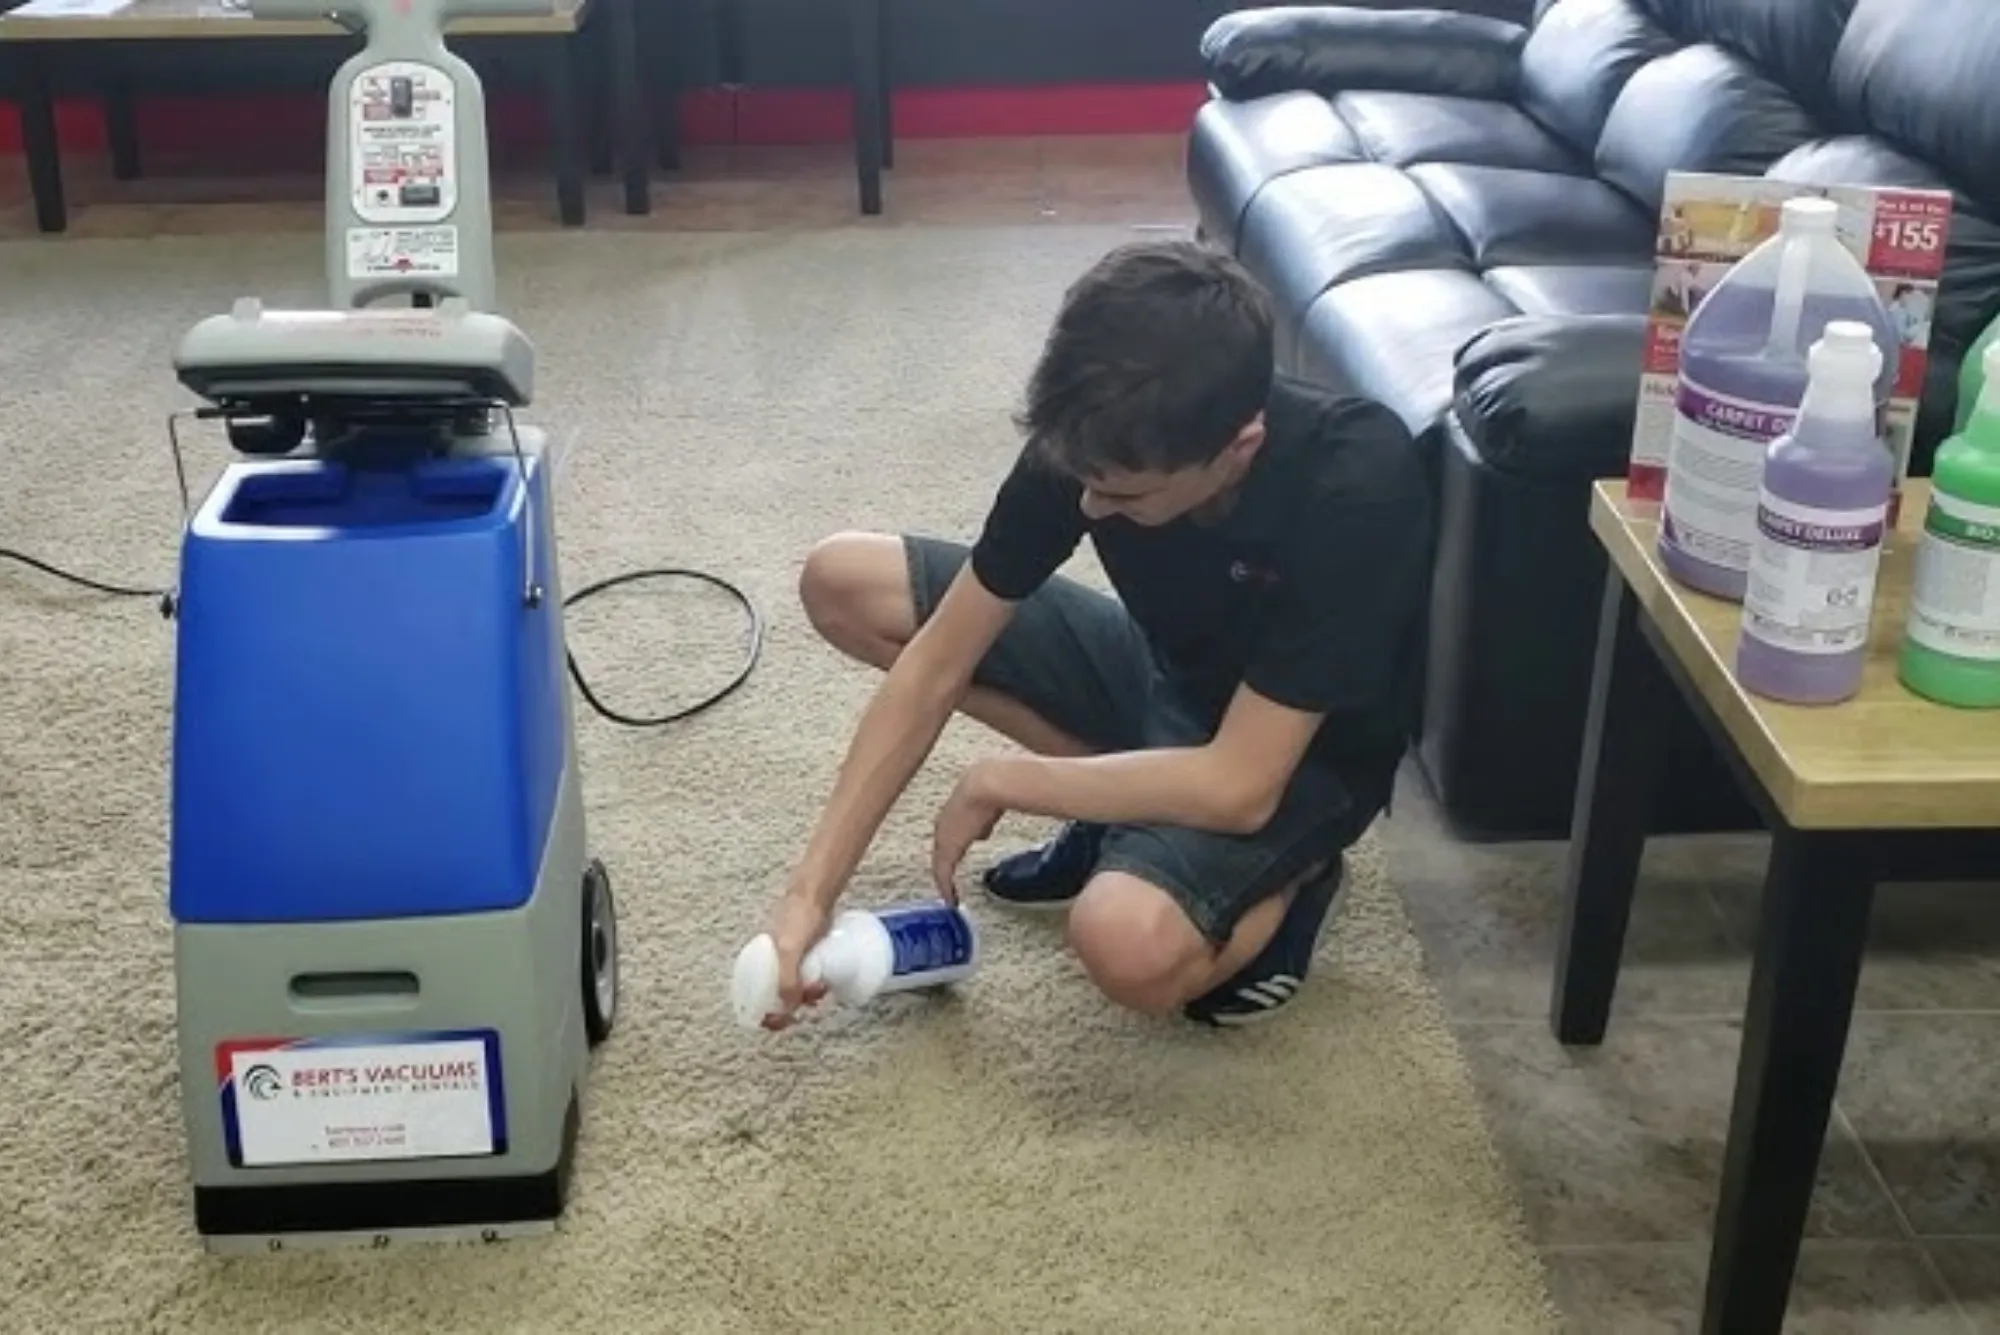 Rent a Carpet Cleaner from Home Depot Costs & Tips